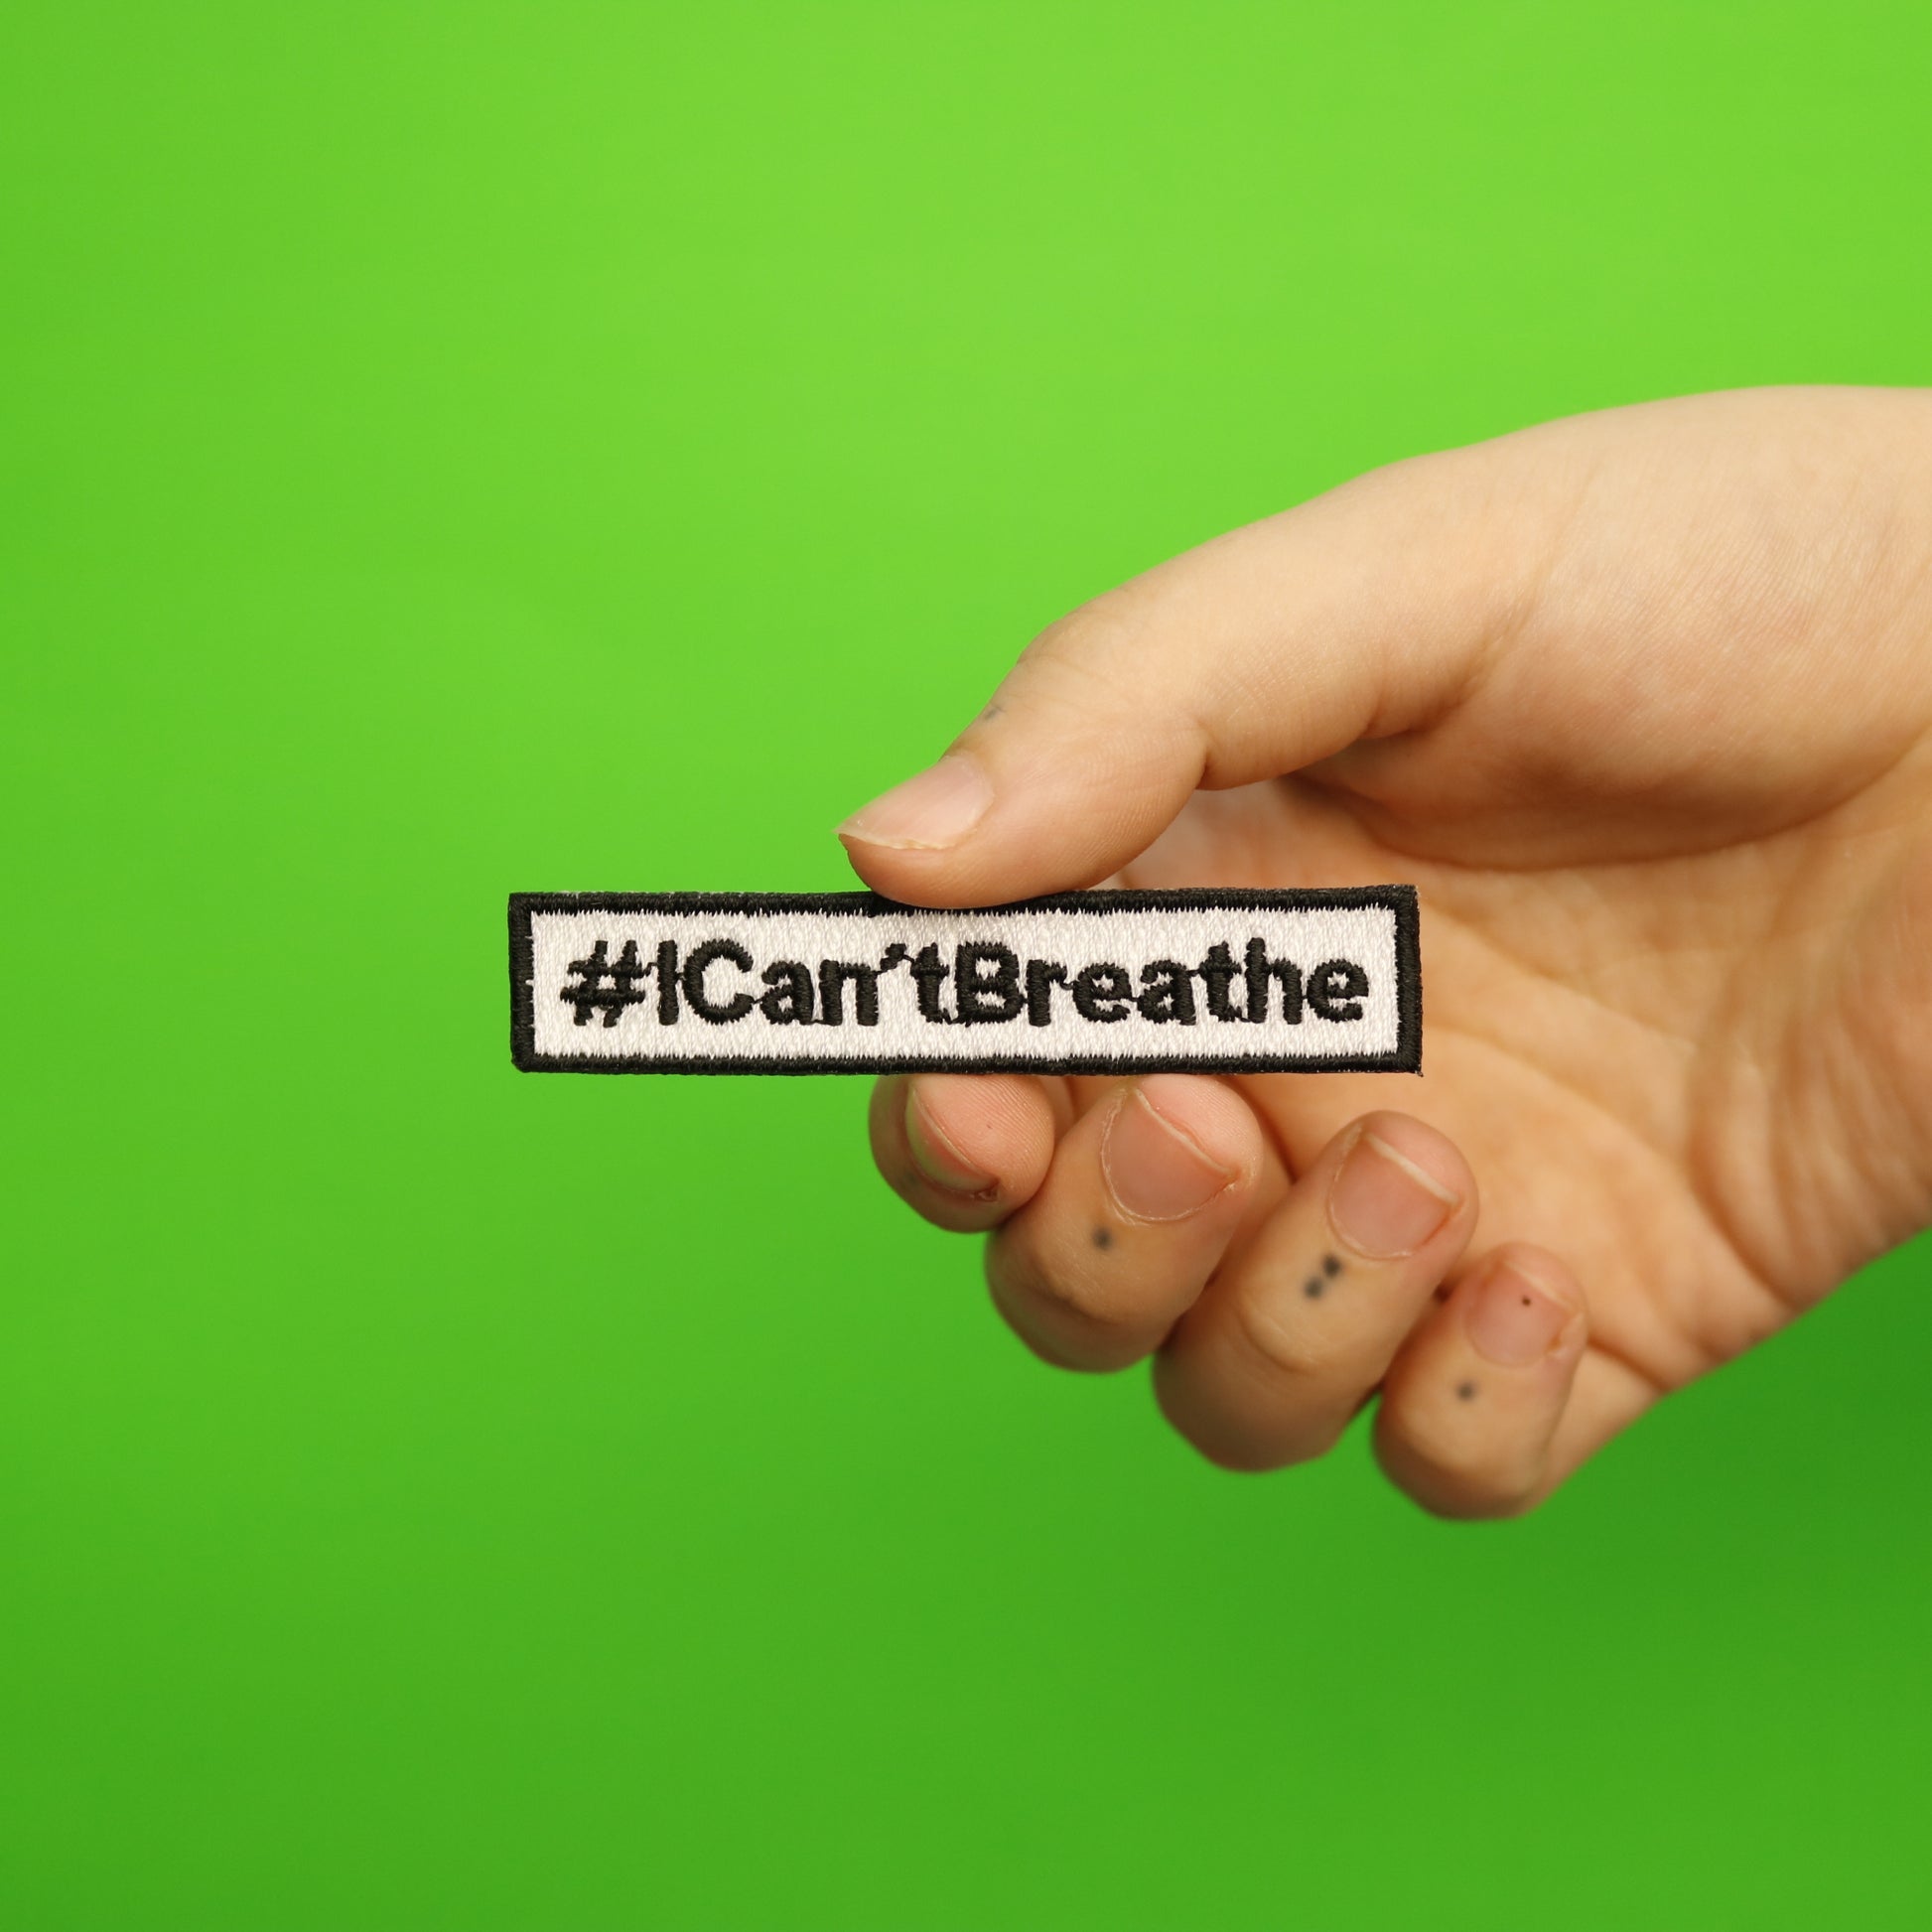 Black Power Fist & #ICan'tBreathe Box Logo Combo Embroidered Iron On Patches 